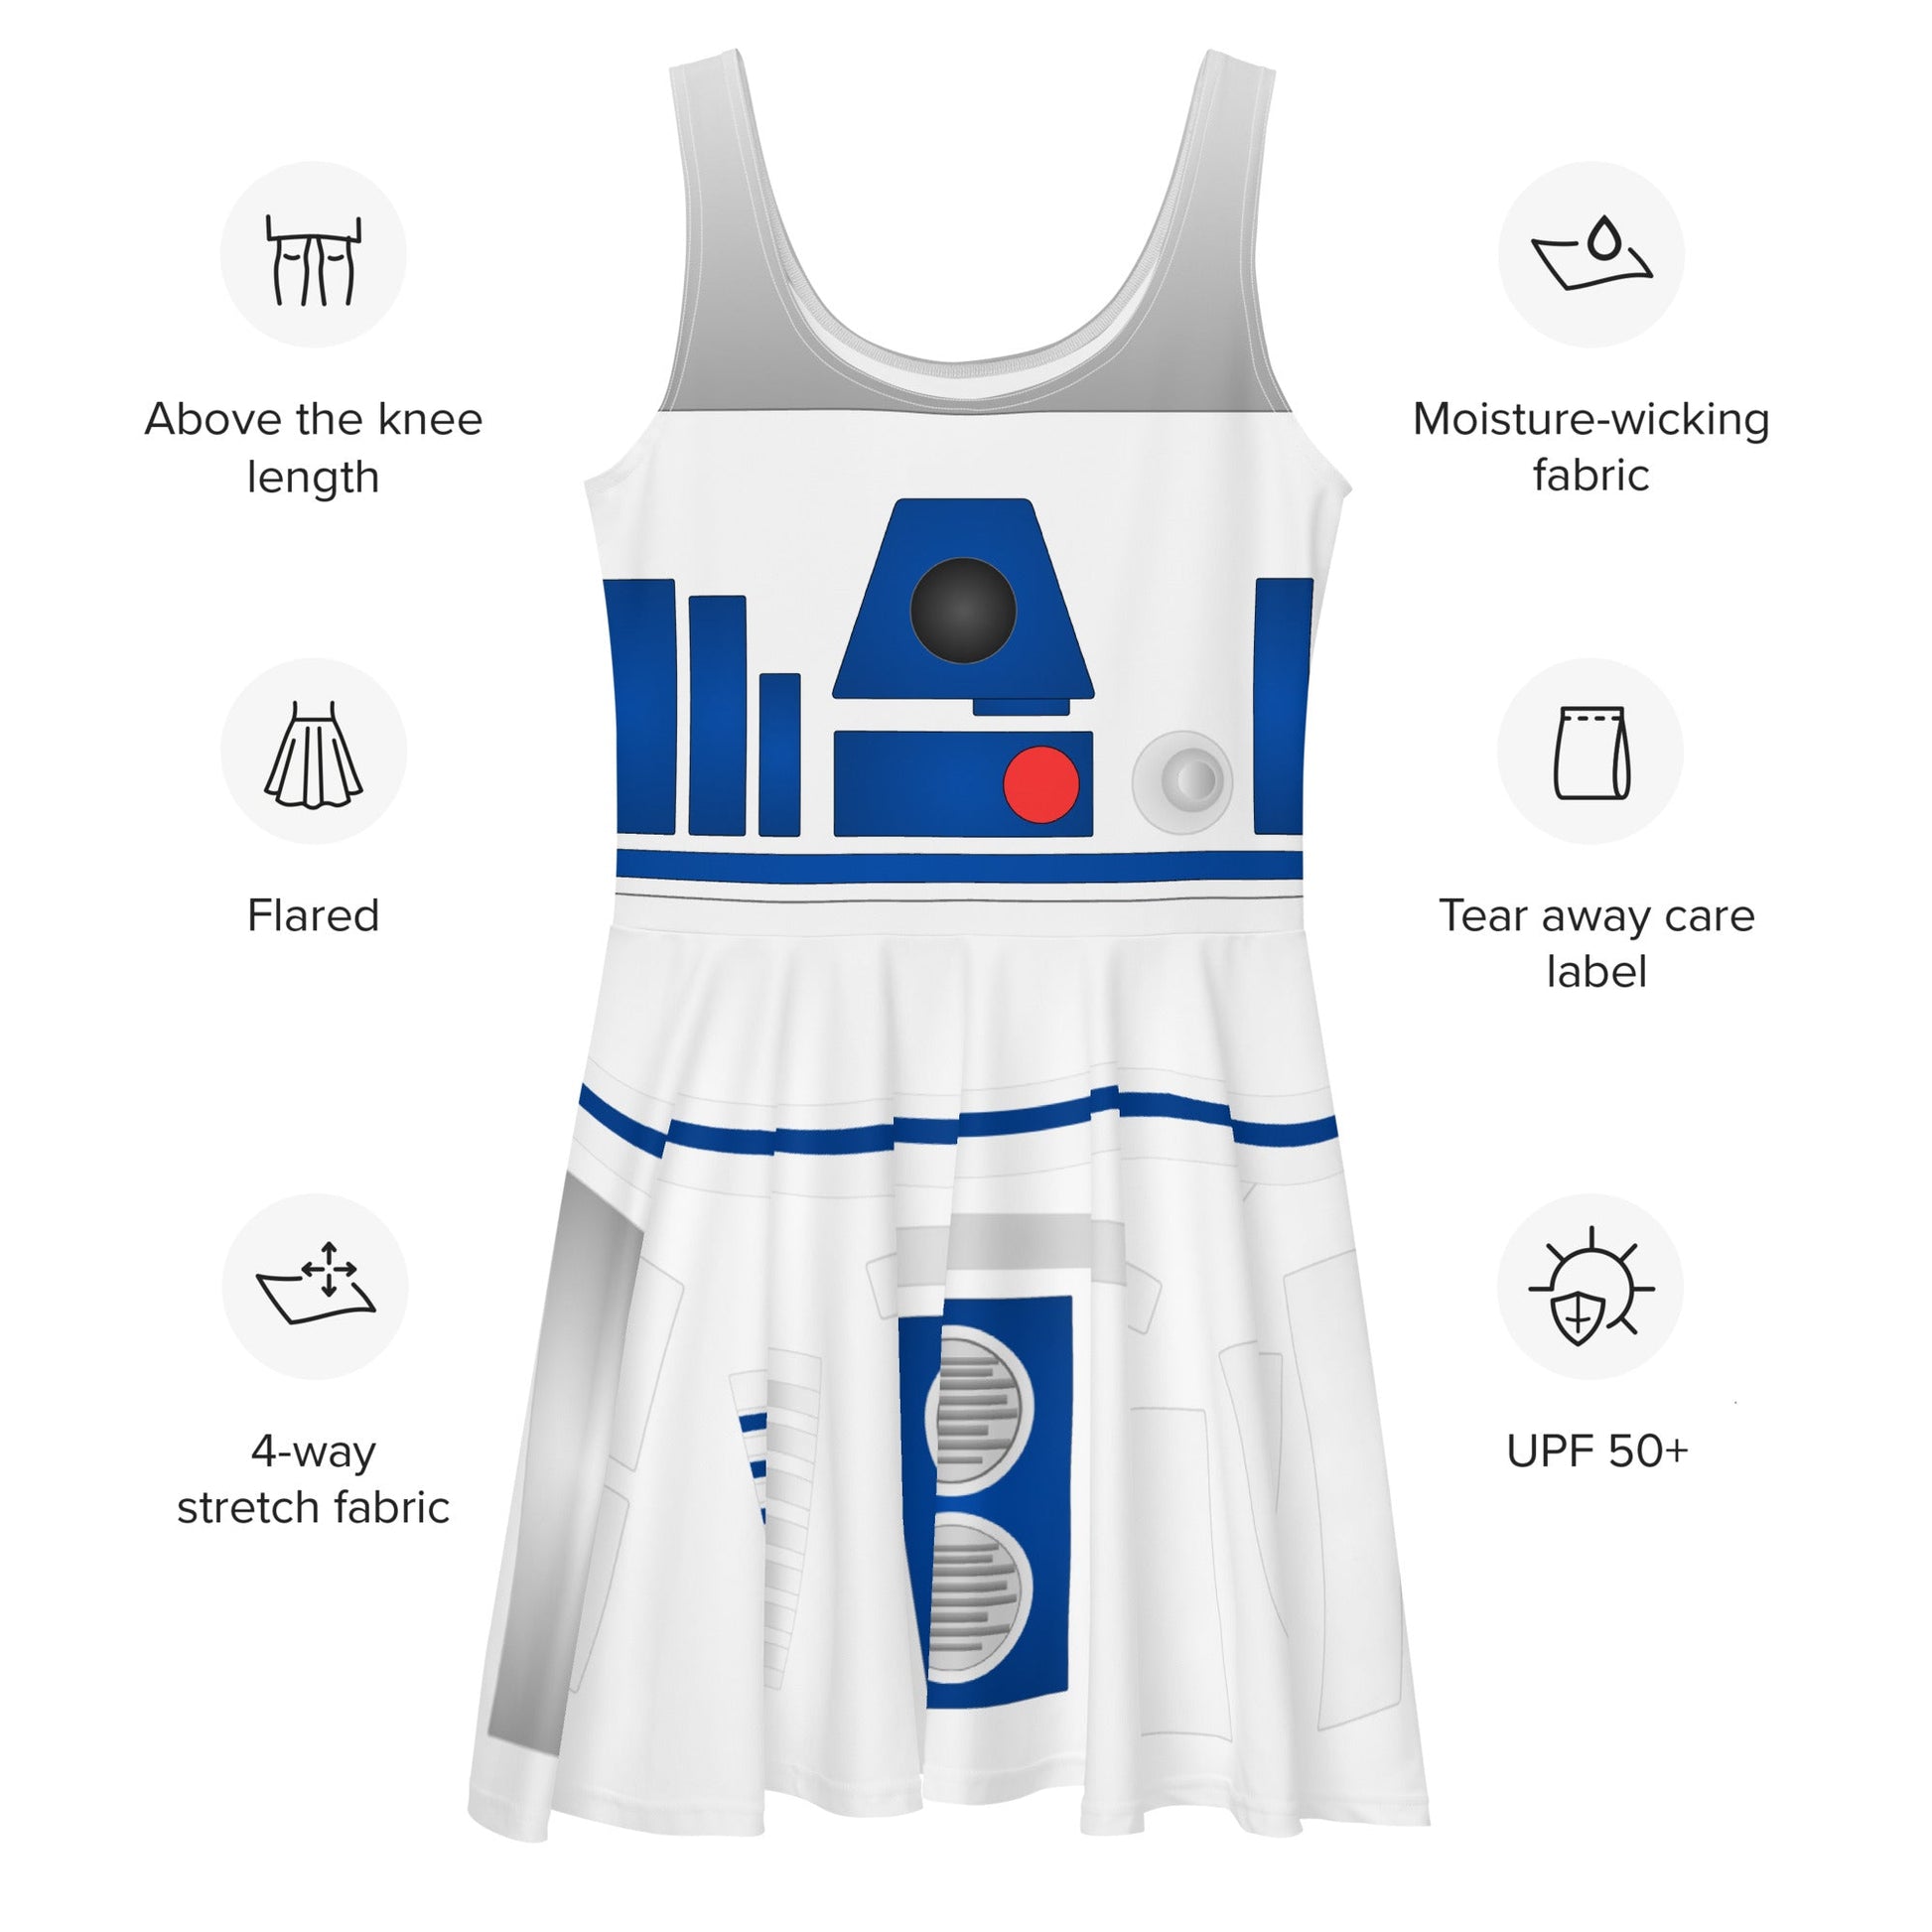 The Droid Skater Dress adult cosplayadult r2d2 costumeWrong Lever Clothing